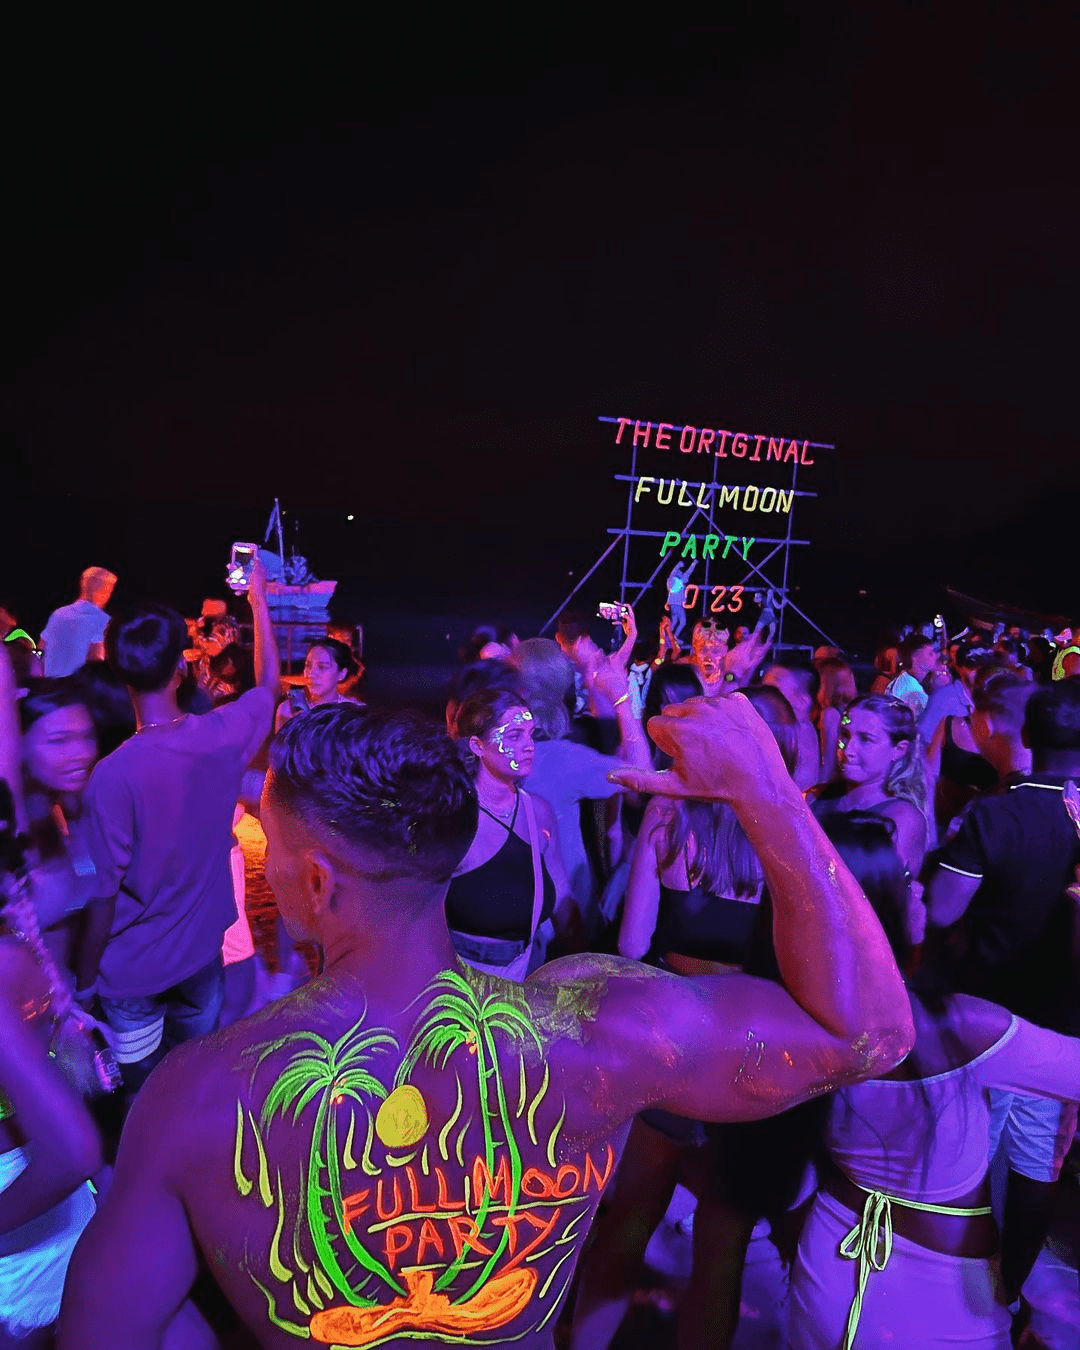 full moon party - neon paint that says fullmoonparty